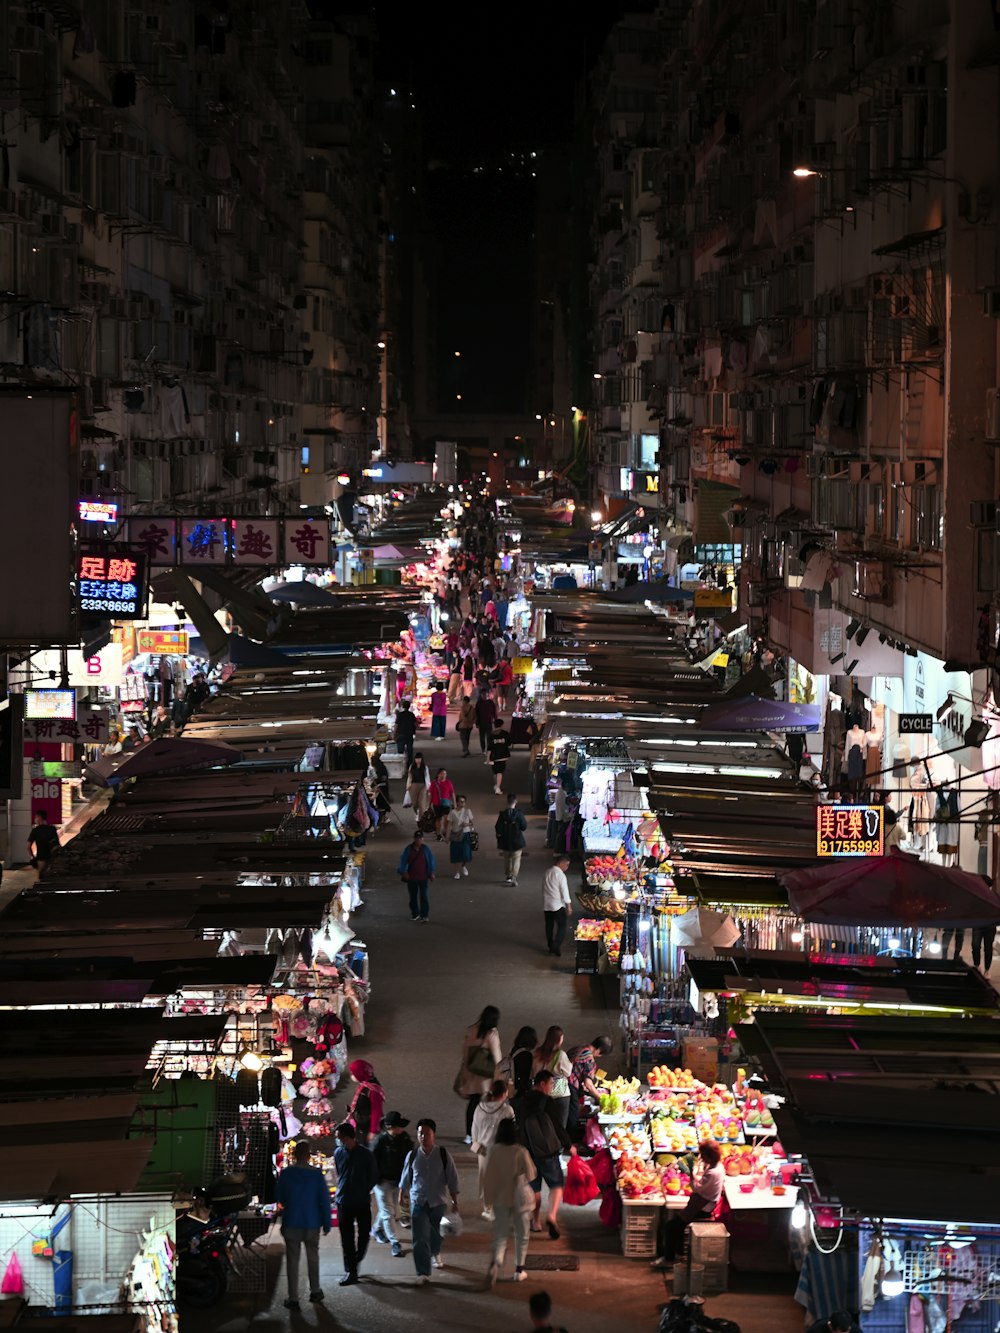 a crowded market area at night with people shopping